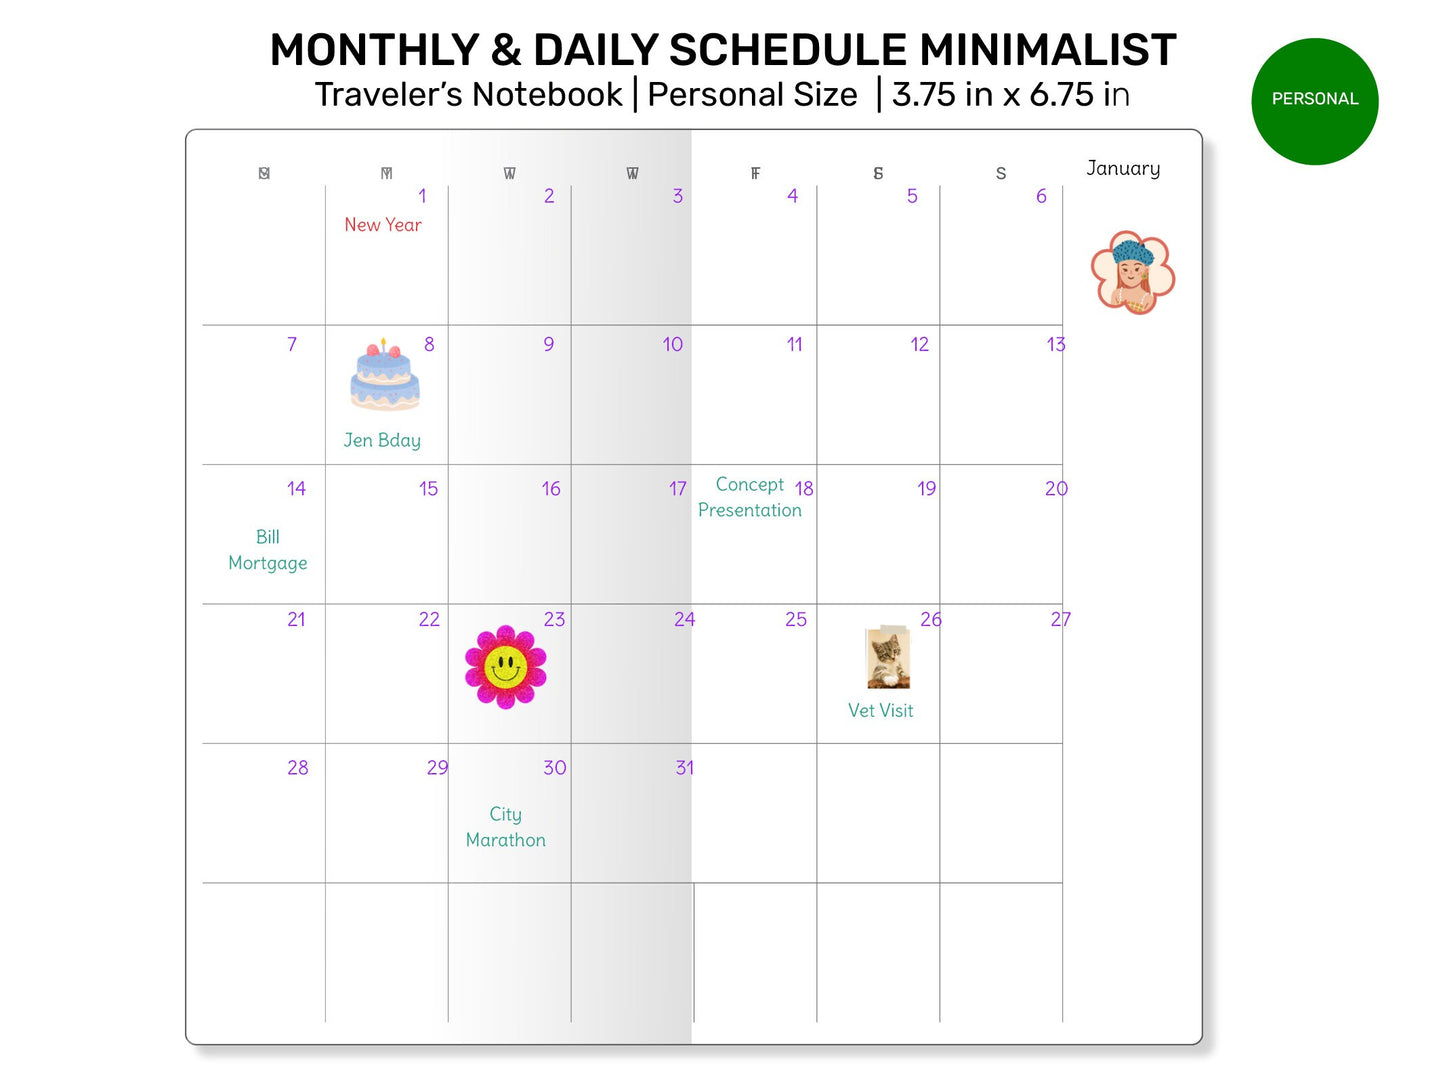 TN Personal Size MONTHLY & DAILY Schedule Printable Refill Insert Traveler's Notebook Insert Minimalist | PER22-008